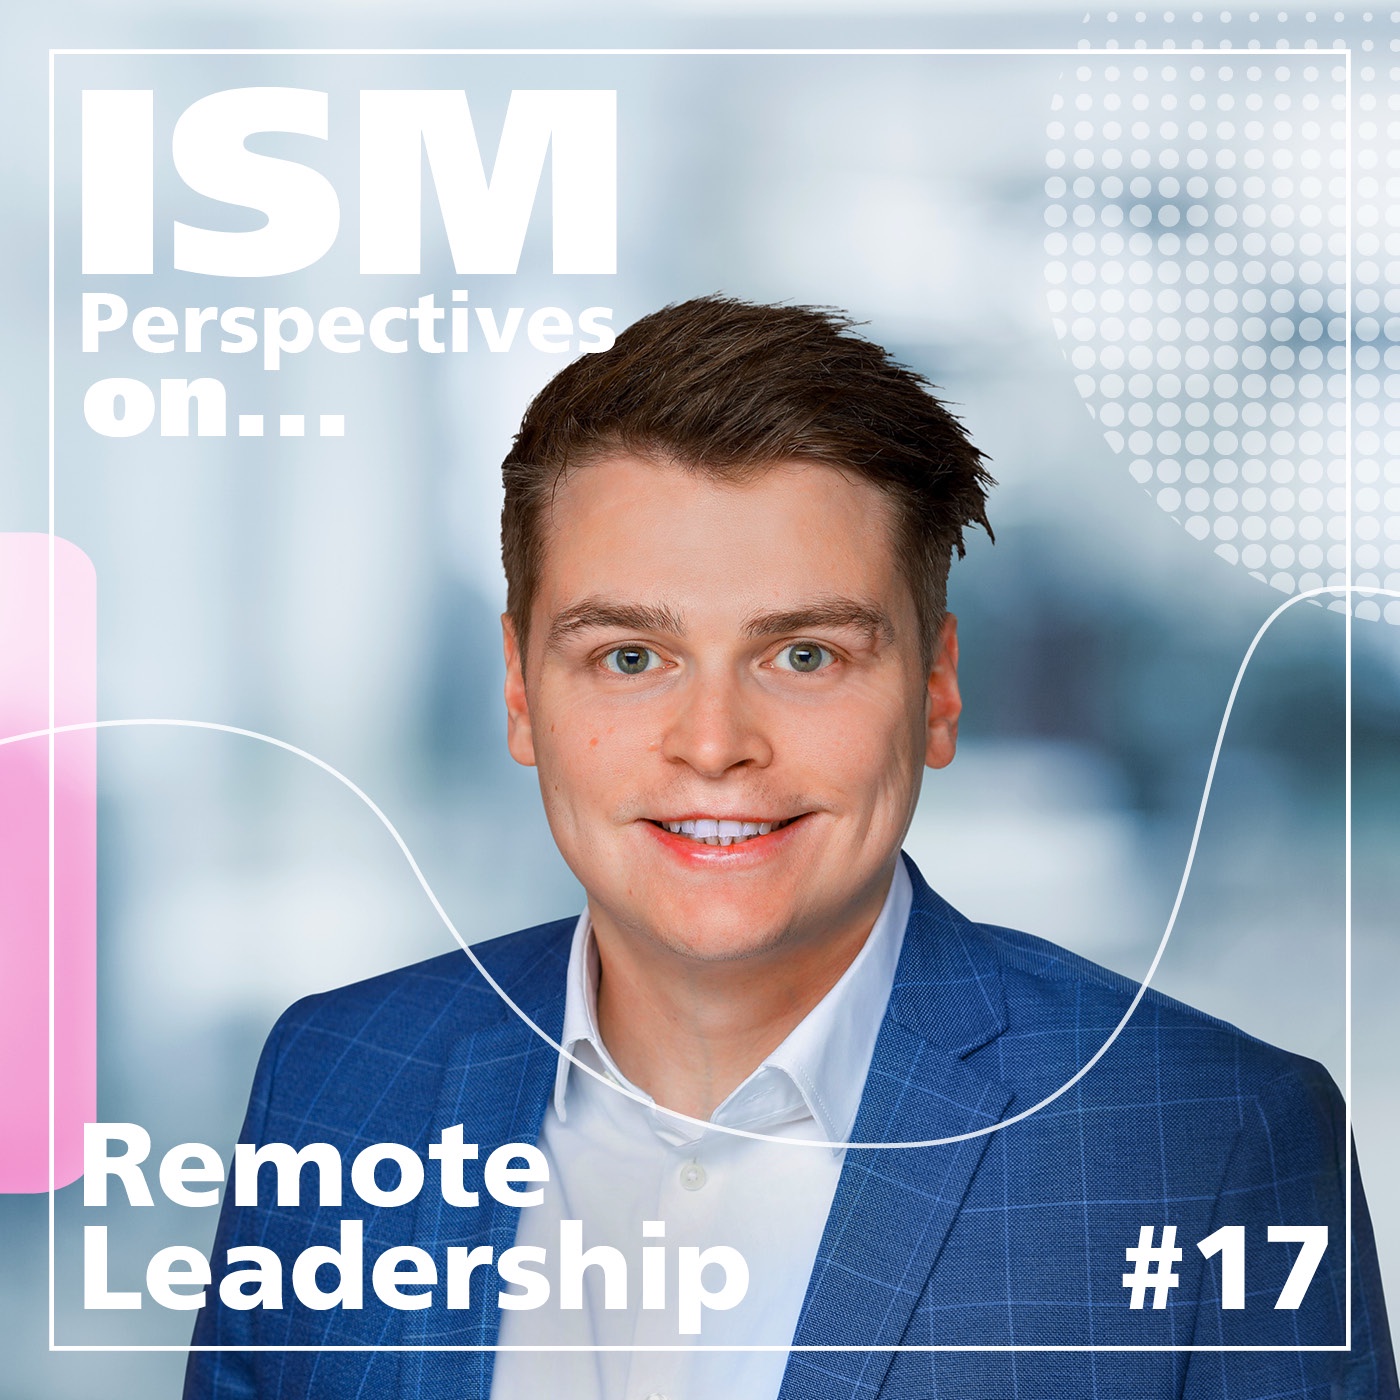 Perspective on: Remote Leadership